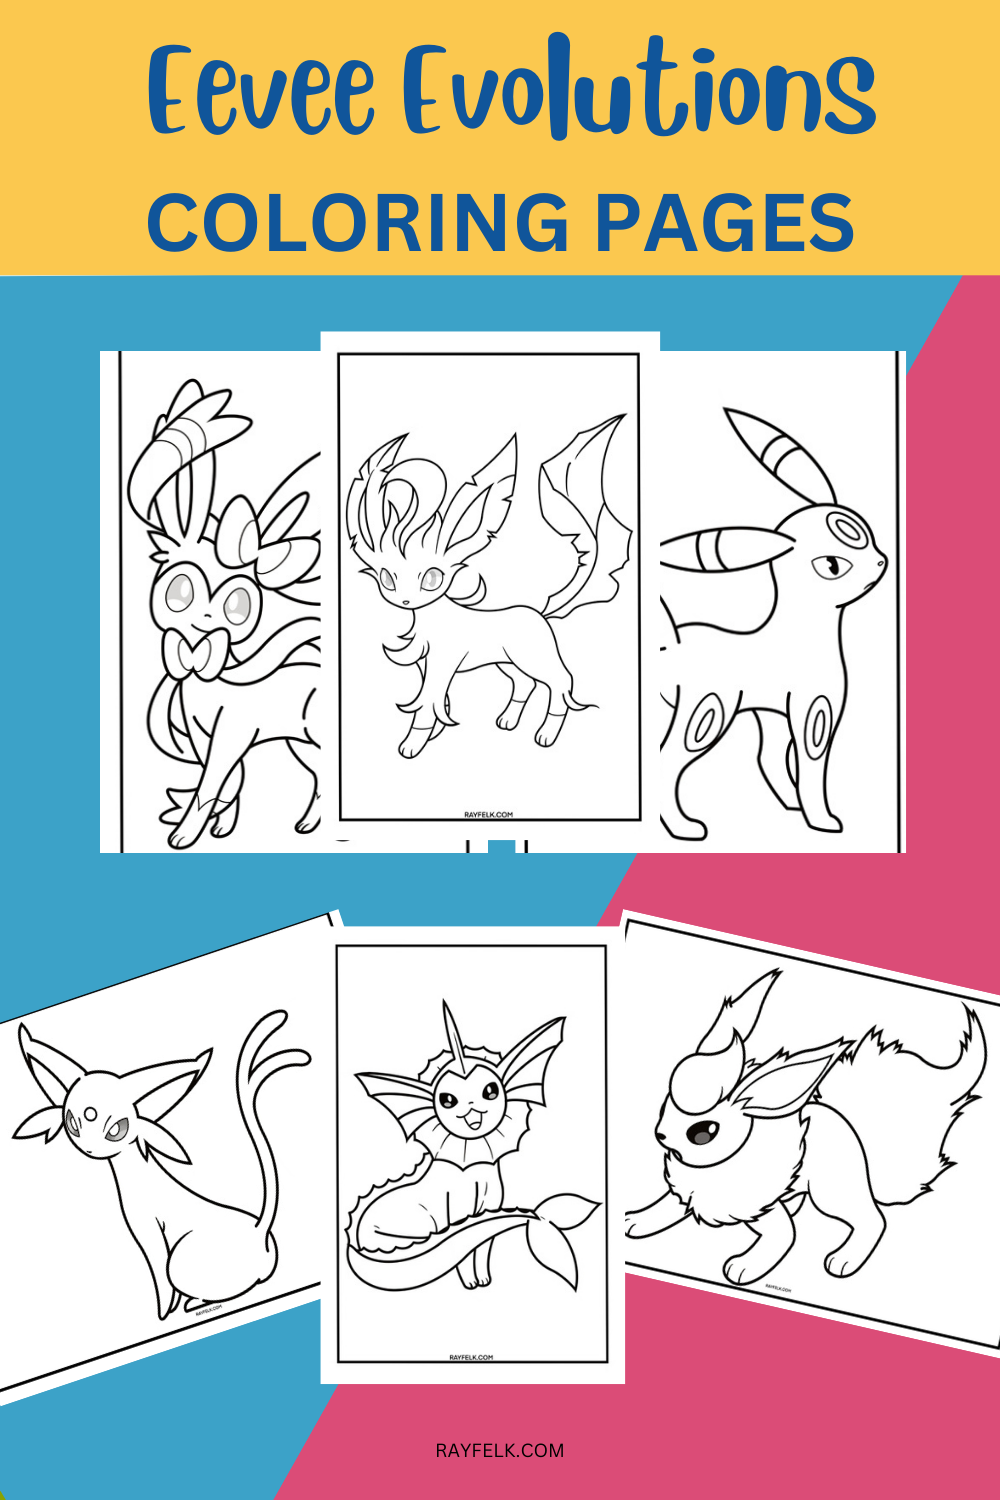 Eevee Evolutions coloring Pages